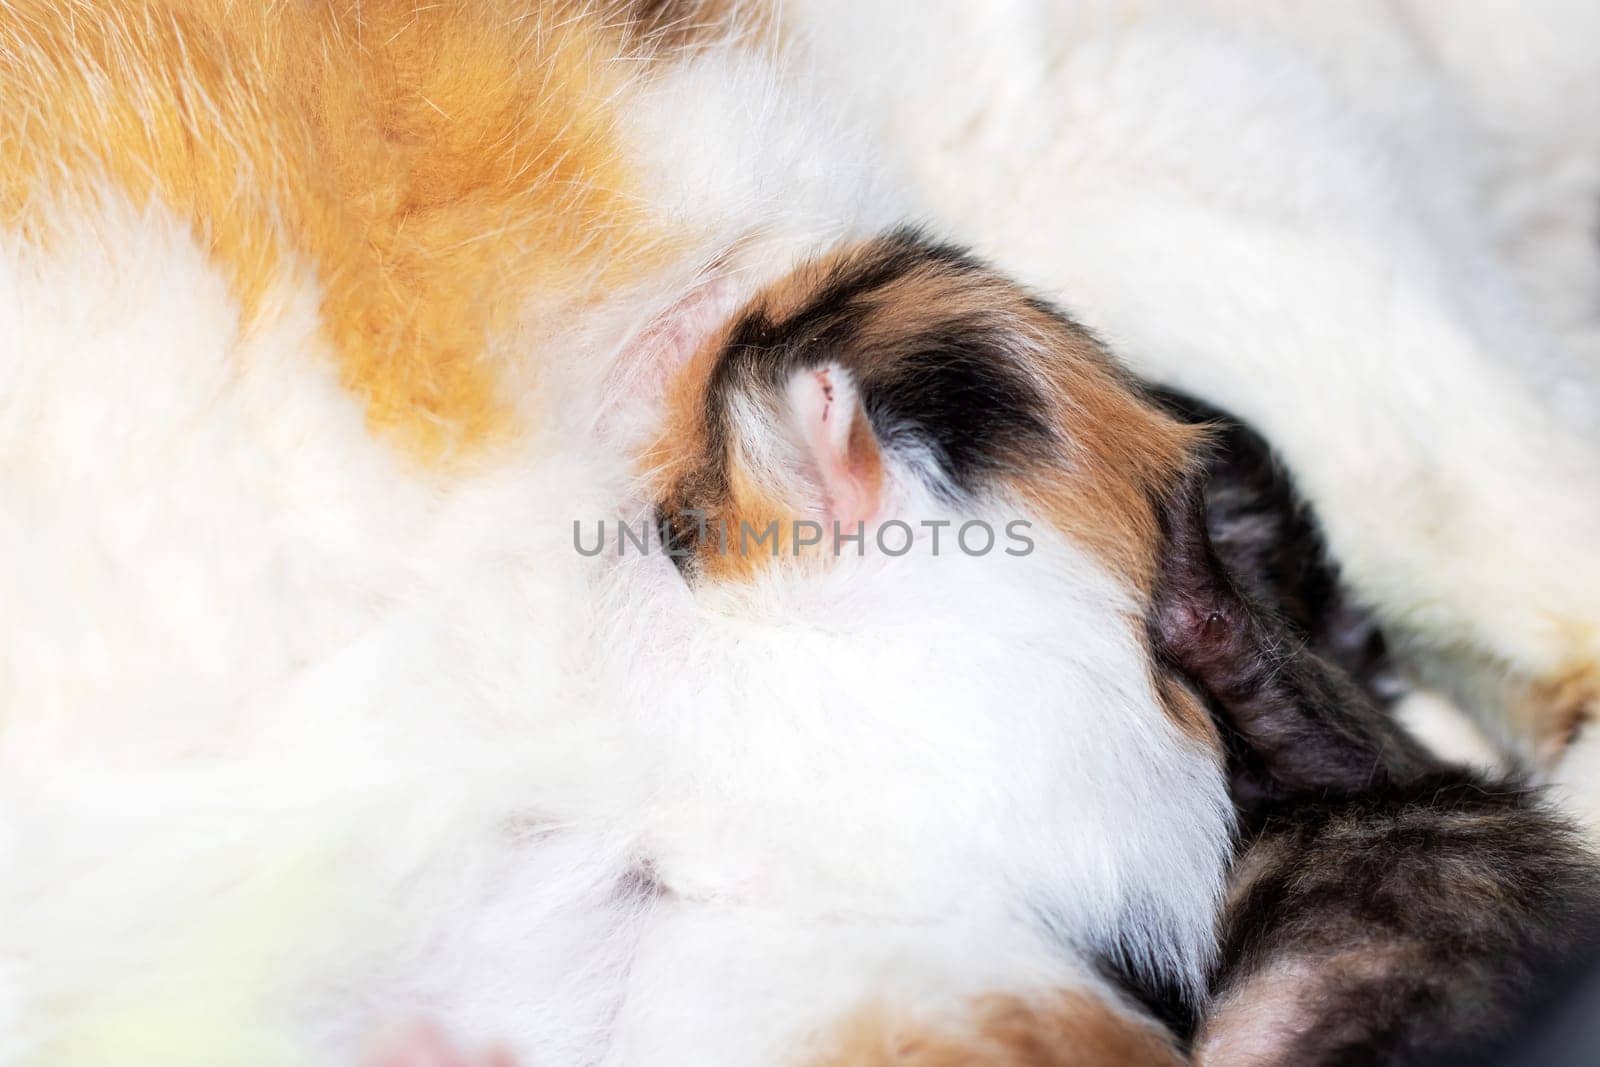 A small calico Felidae kitten with whiskers is nursing from its mothers breast while her tail sways. The closeup shot captures the fawn fur, tiny snout, and fluffy foam around her mouth